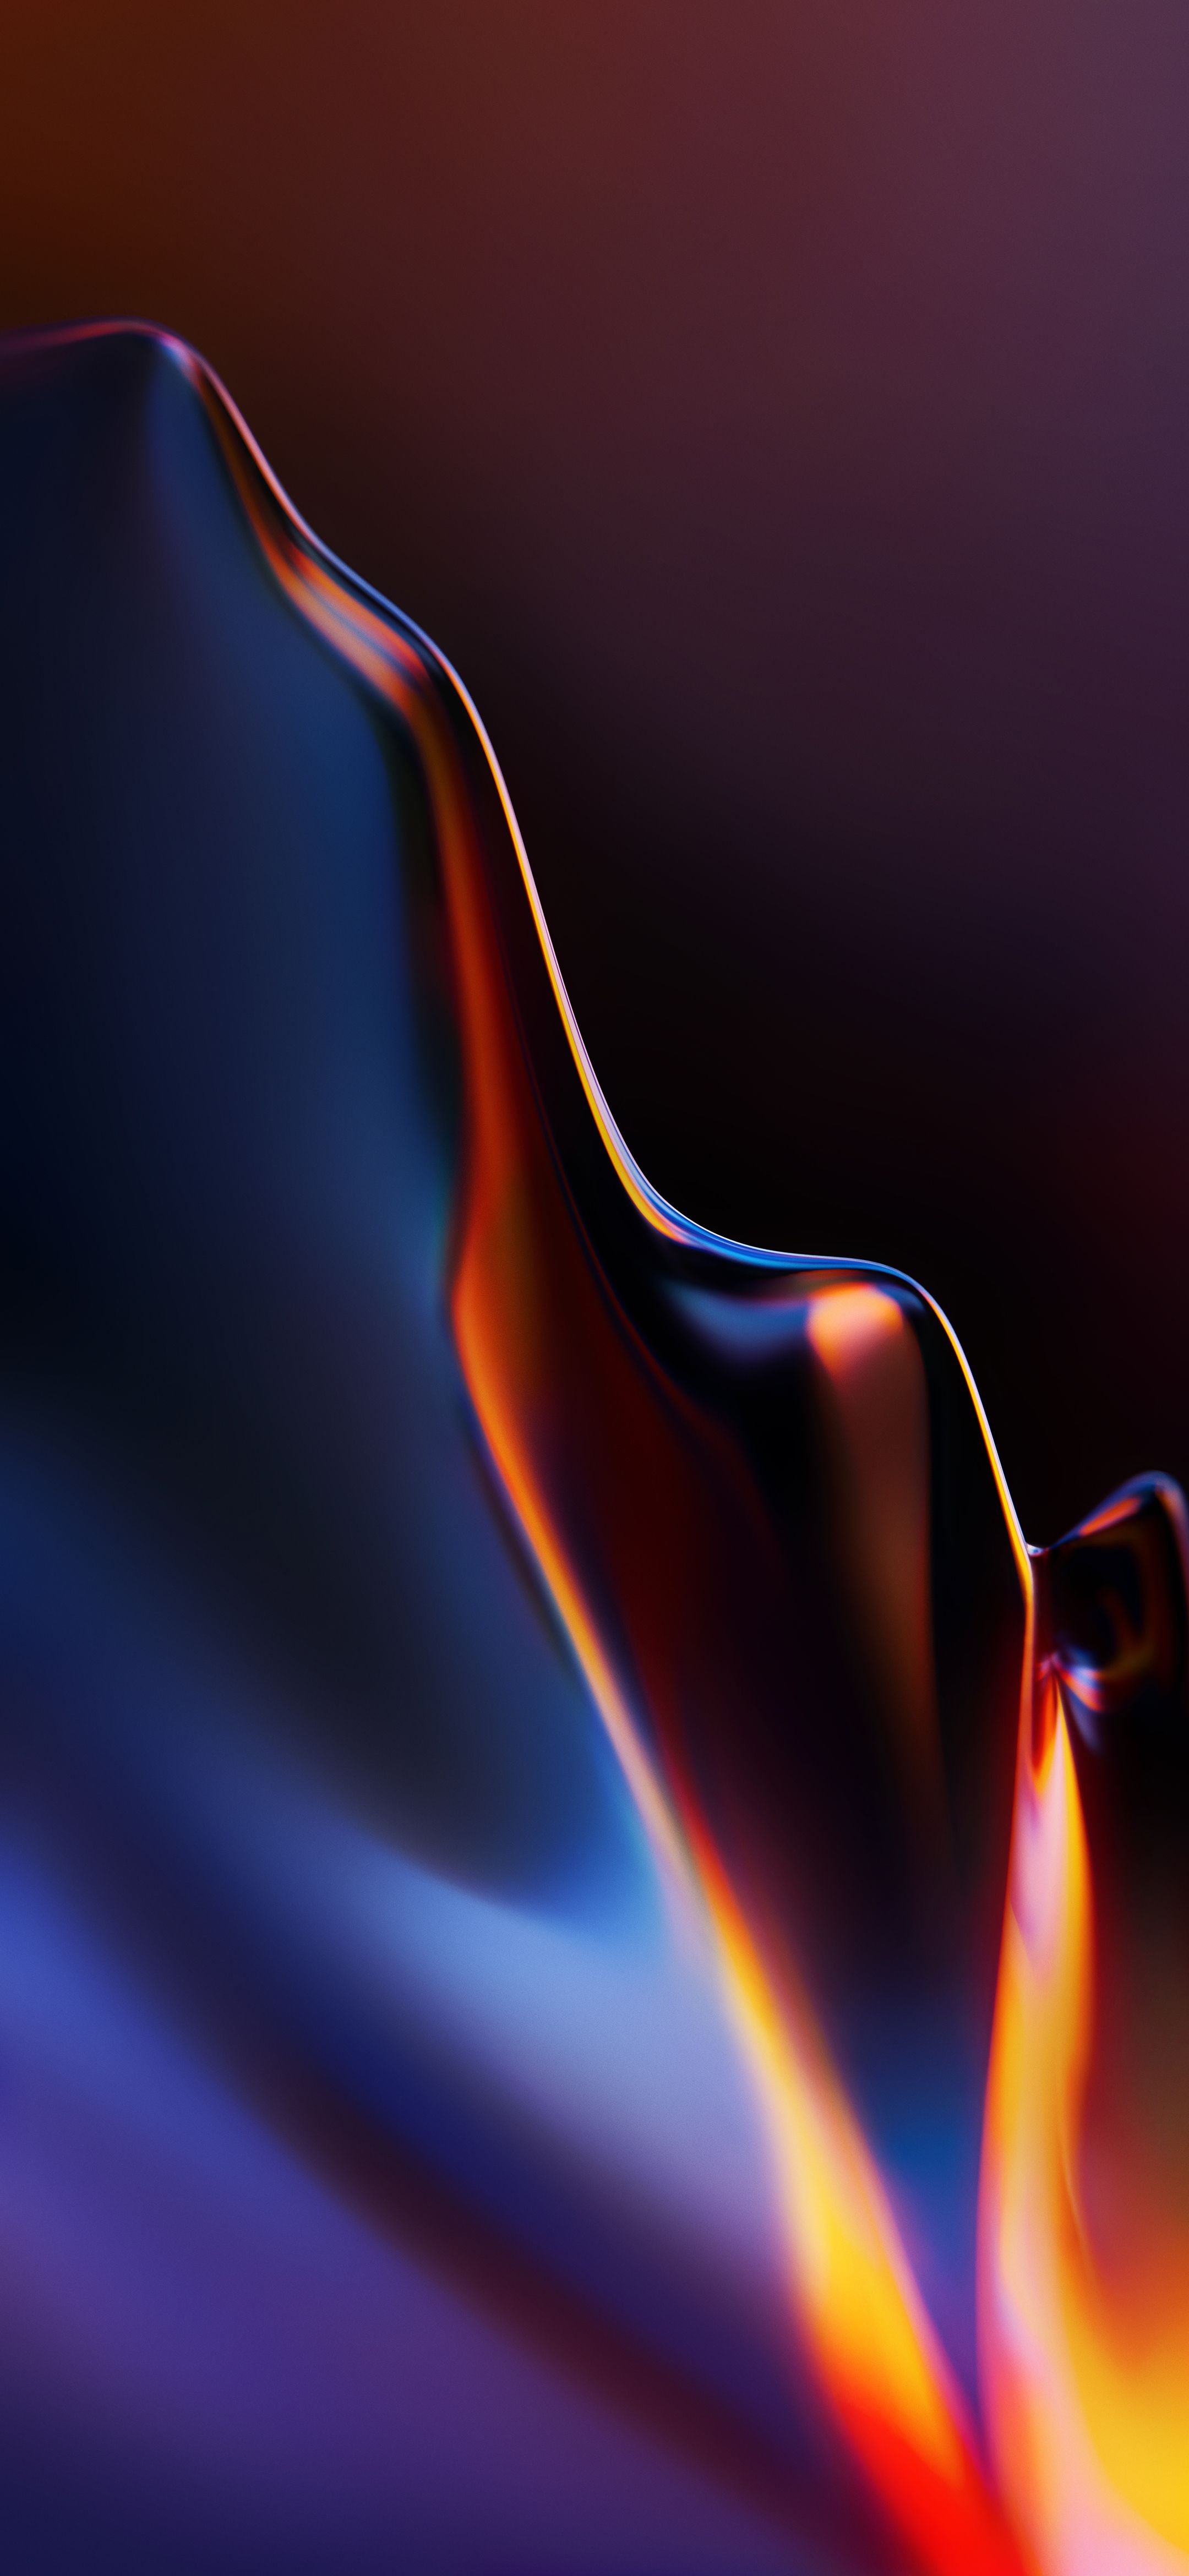 Oneplus 6t Wallpaper Free Oneplus 6t Background